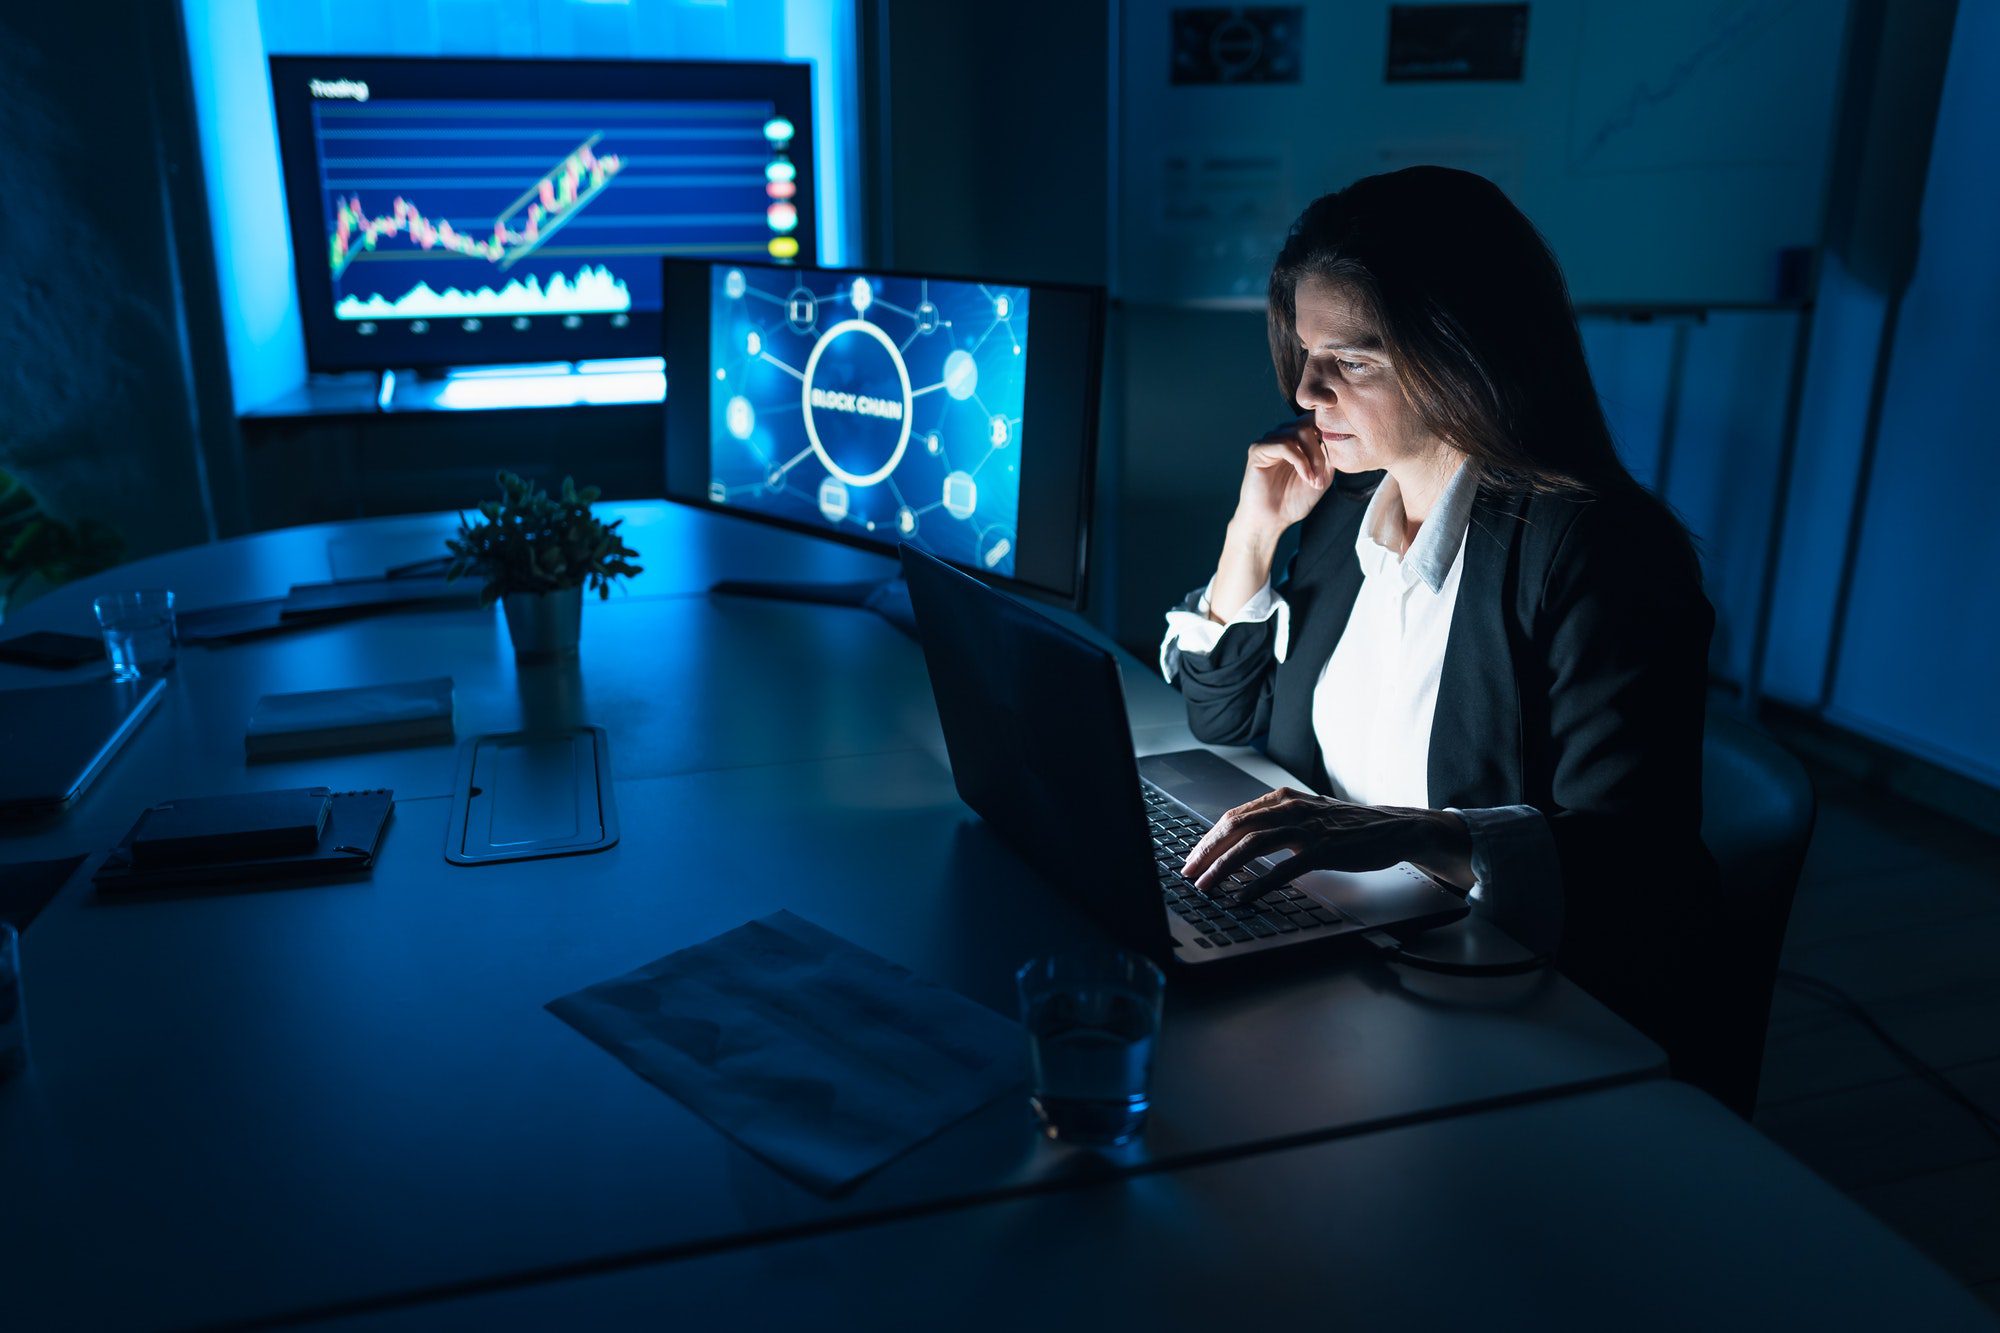 Business stock trader woman working on crypto currency markets with blockchain technology